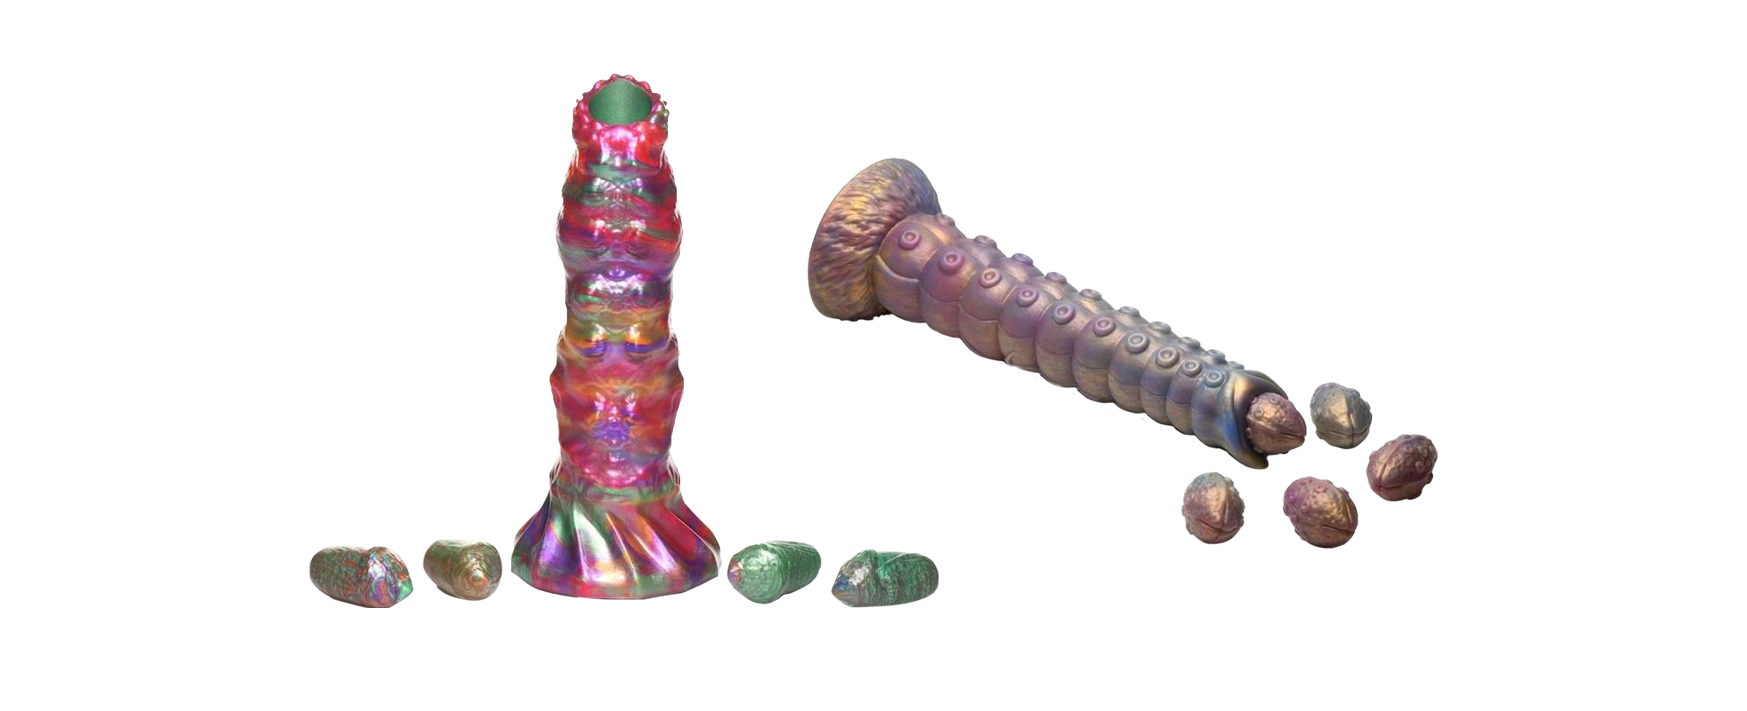 Are Egg Laying or Ovipositor Dildos Safe to use?